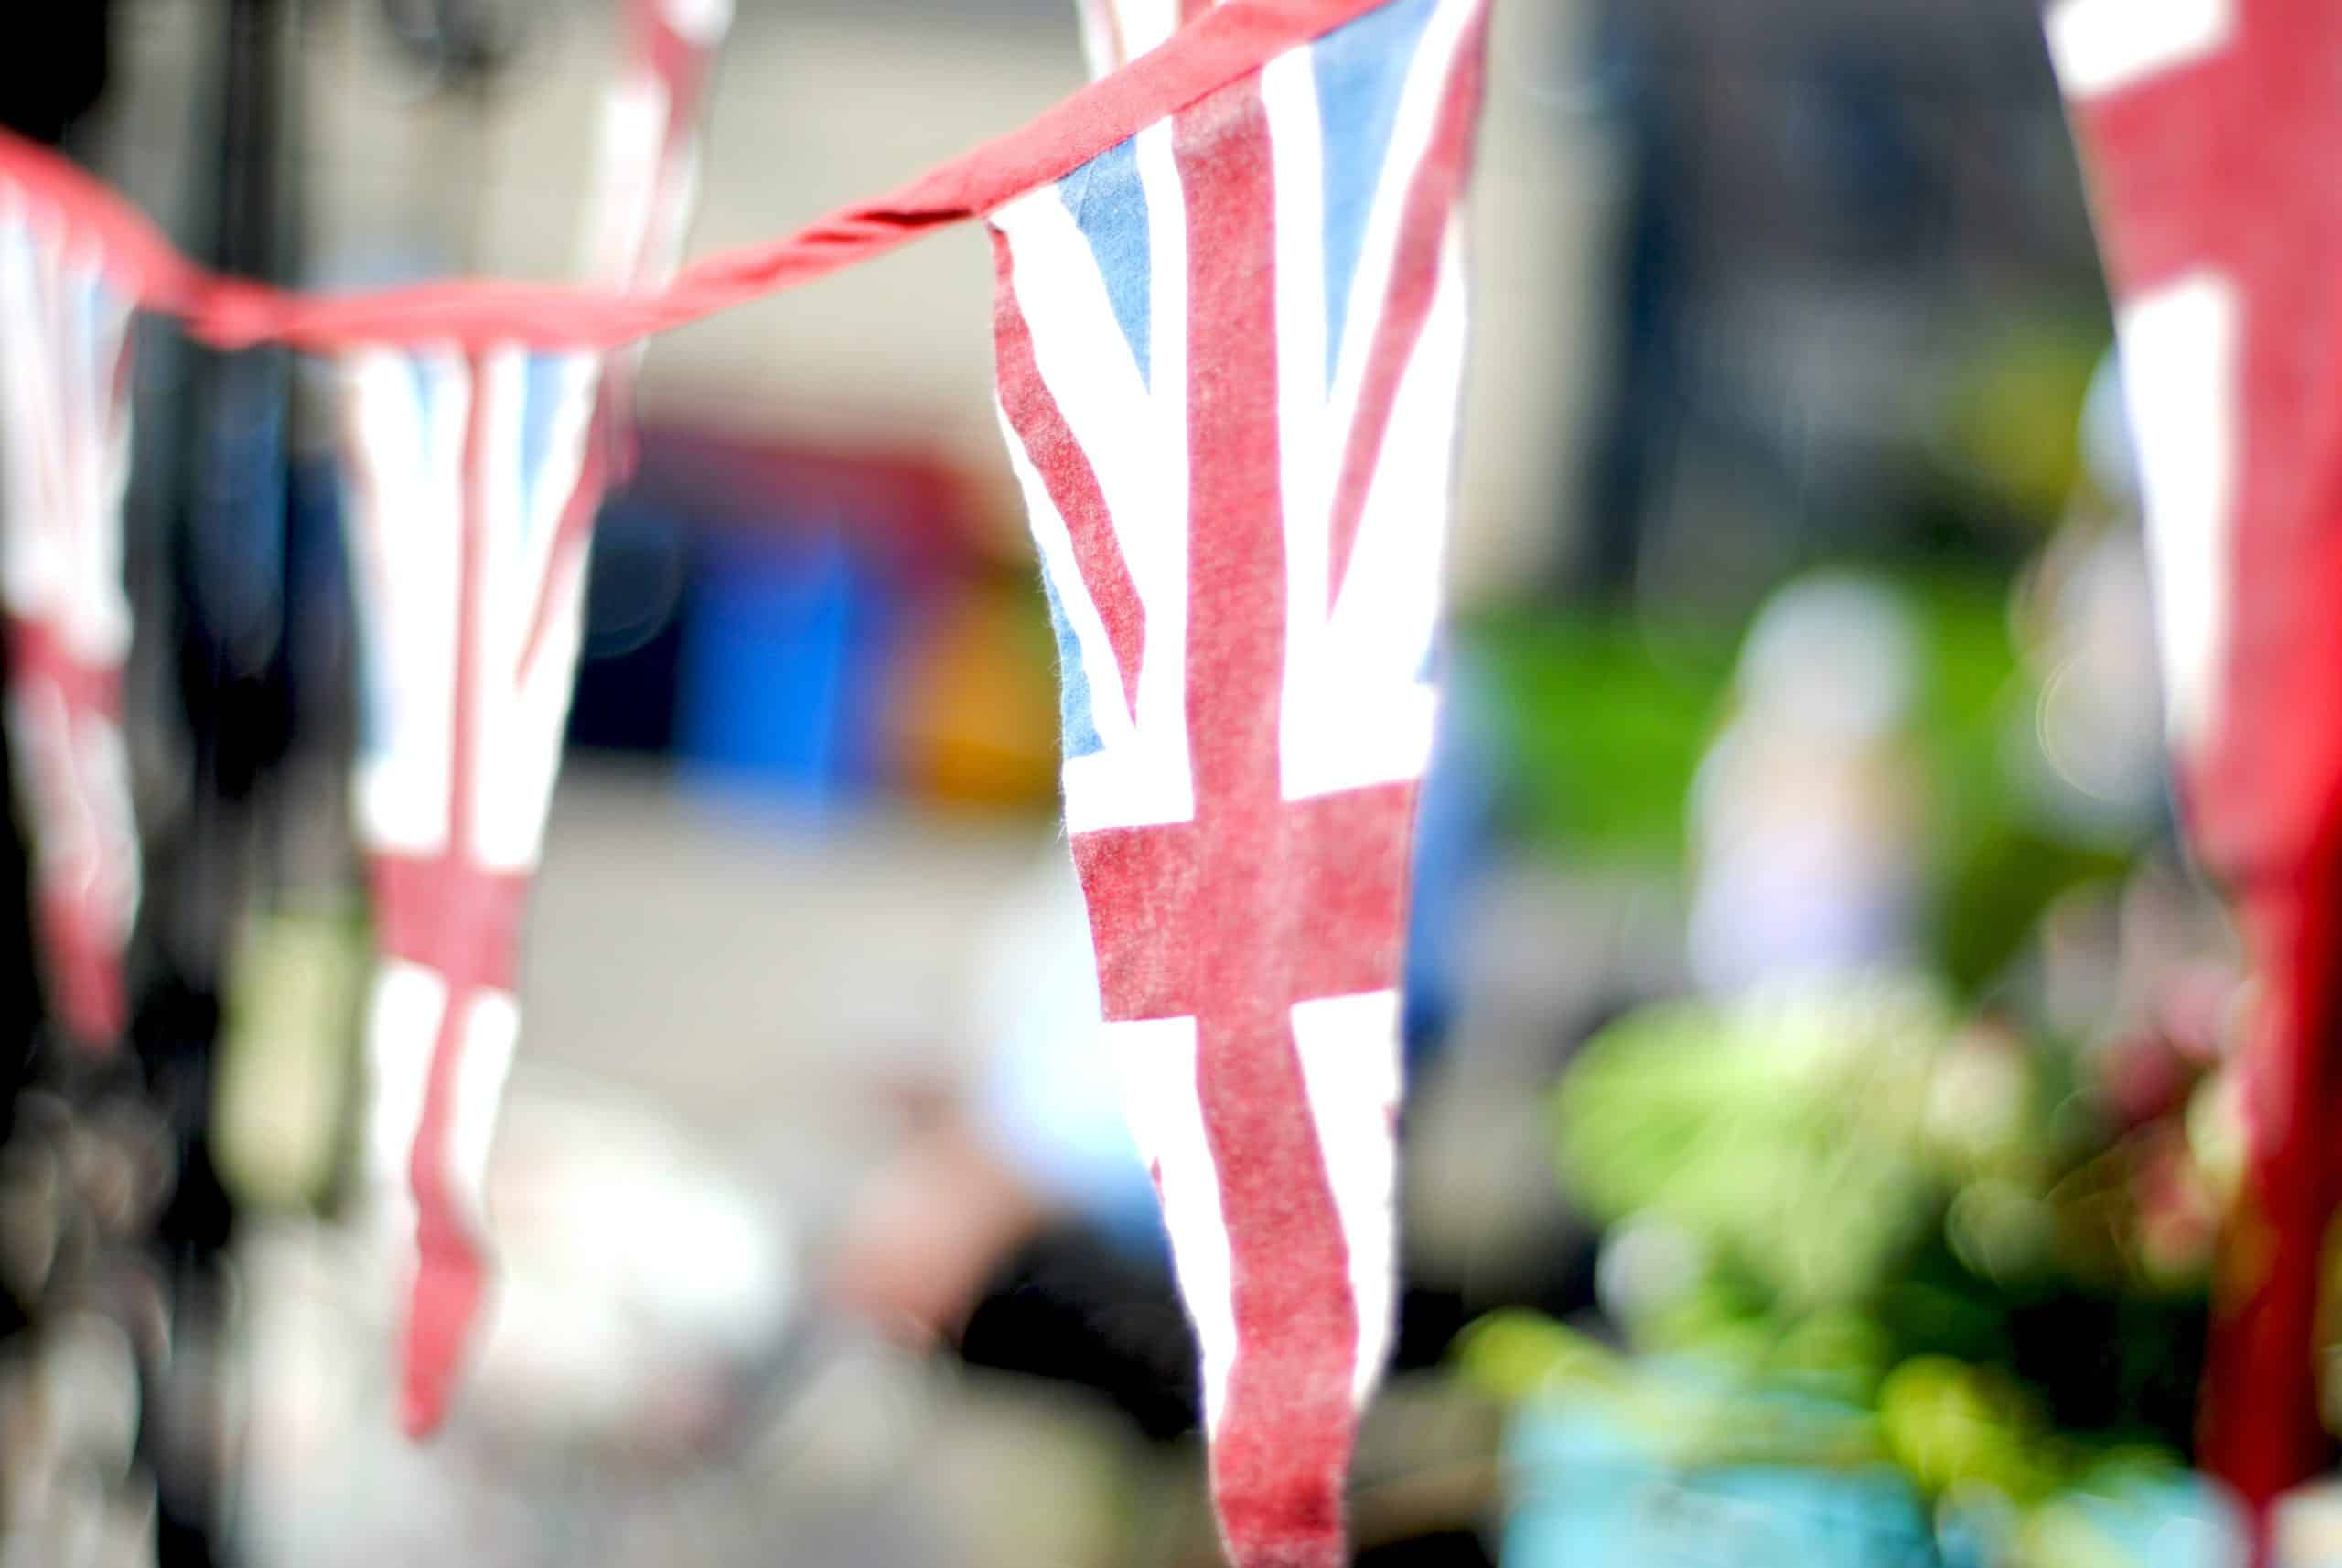 Union Jack Bunting at a Street Party